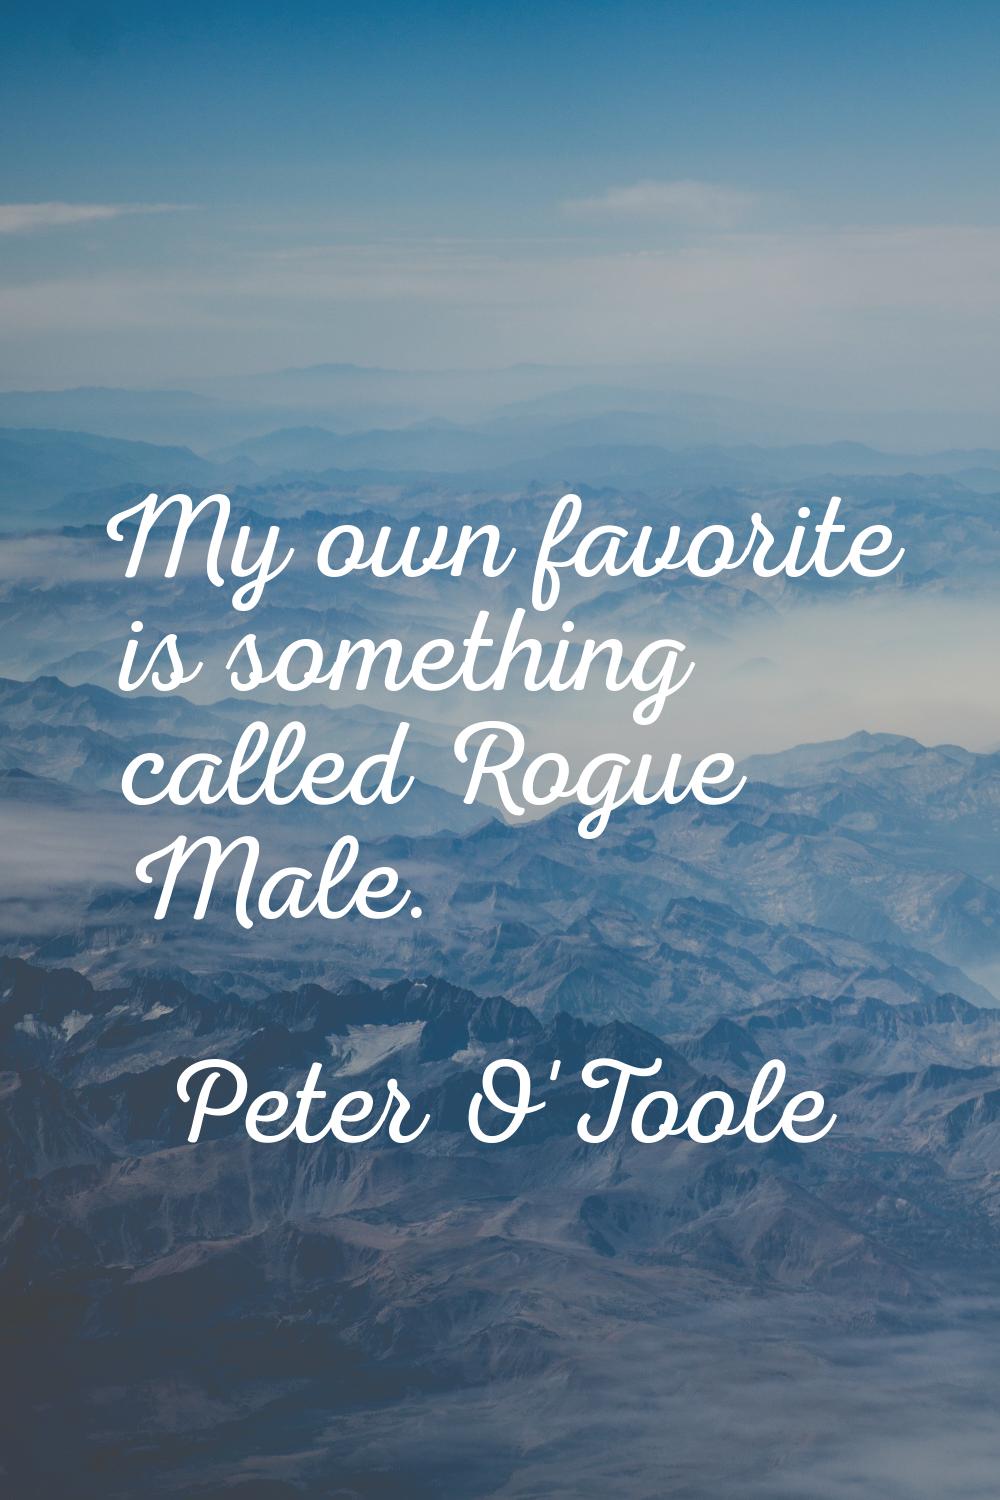 My own favorite is something called Rogue Male.